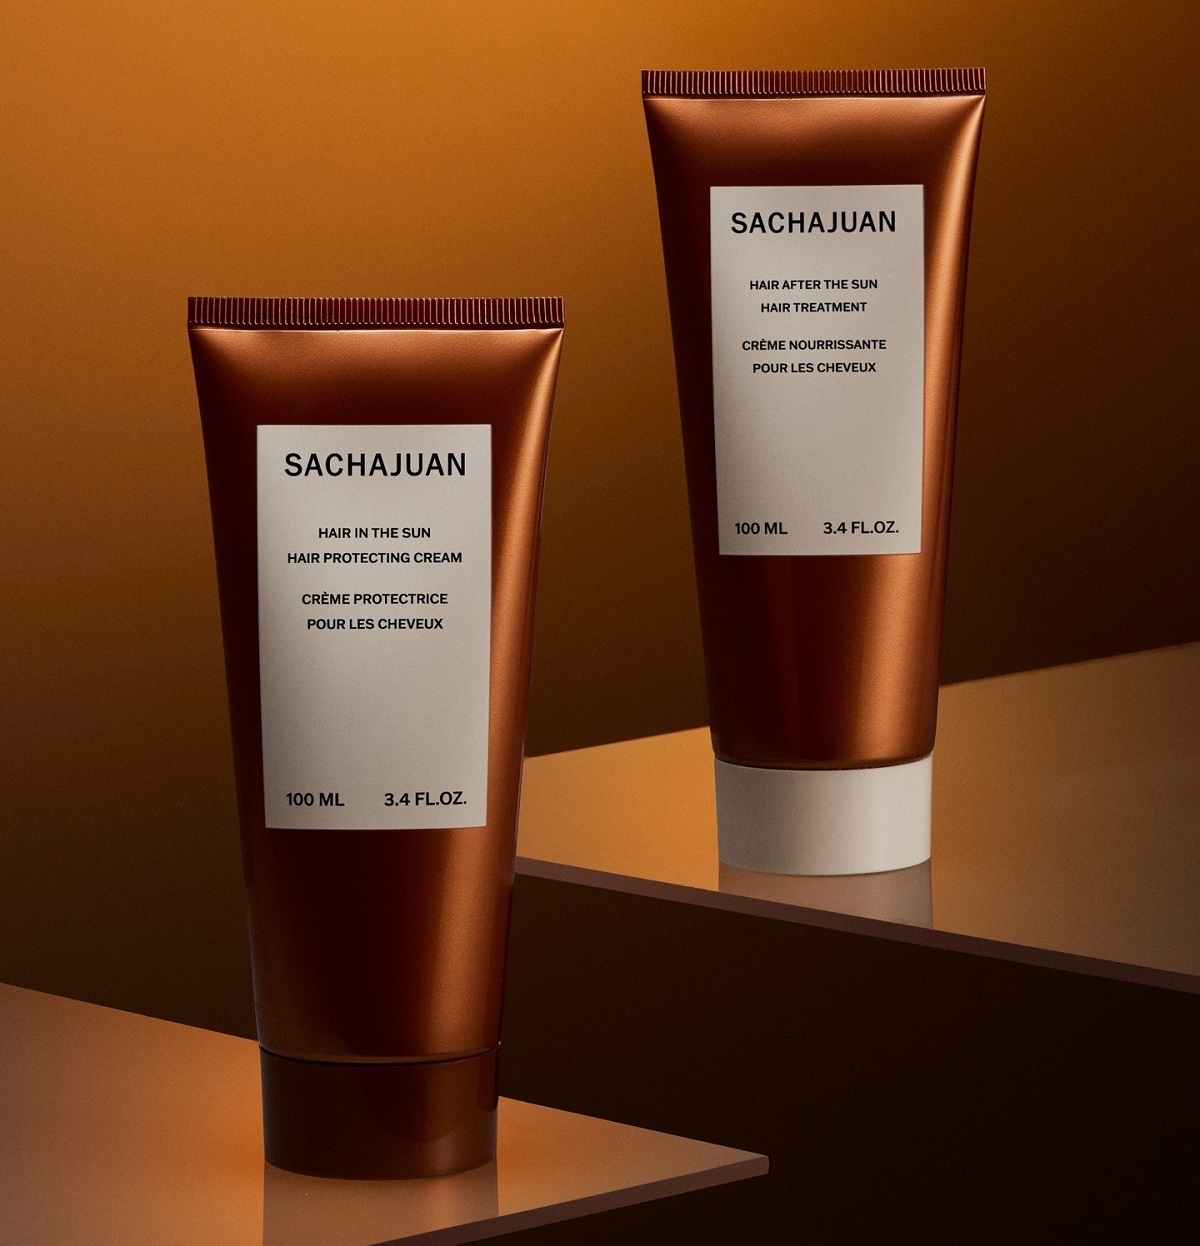 New launches from Sachajuan